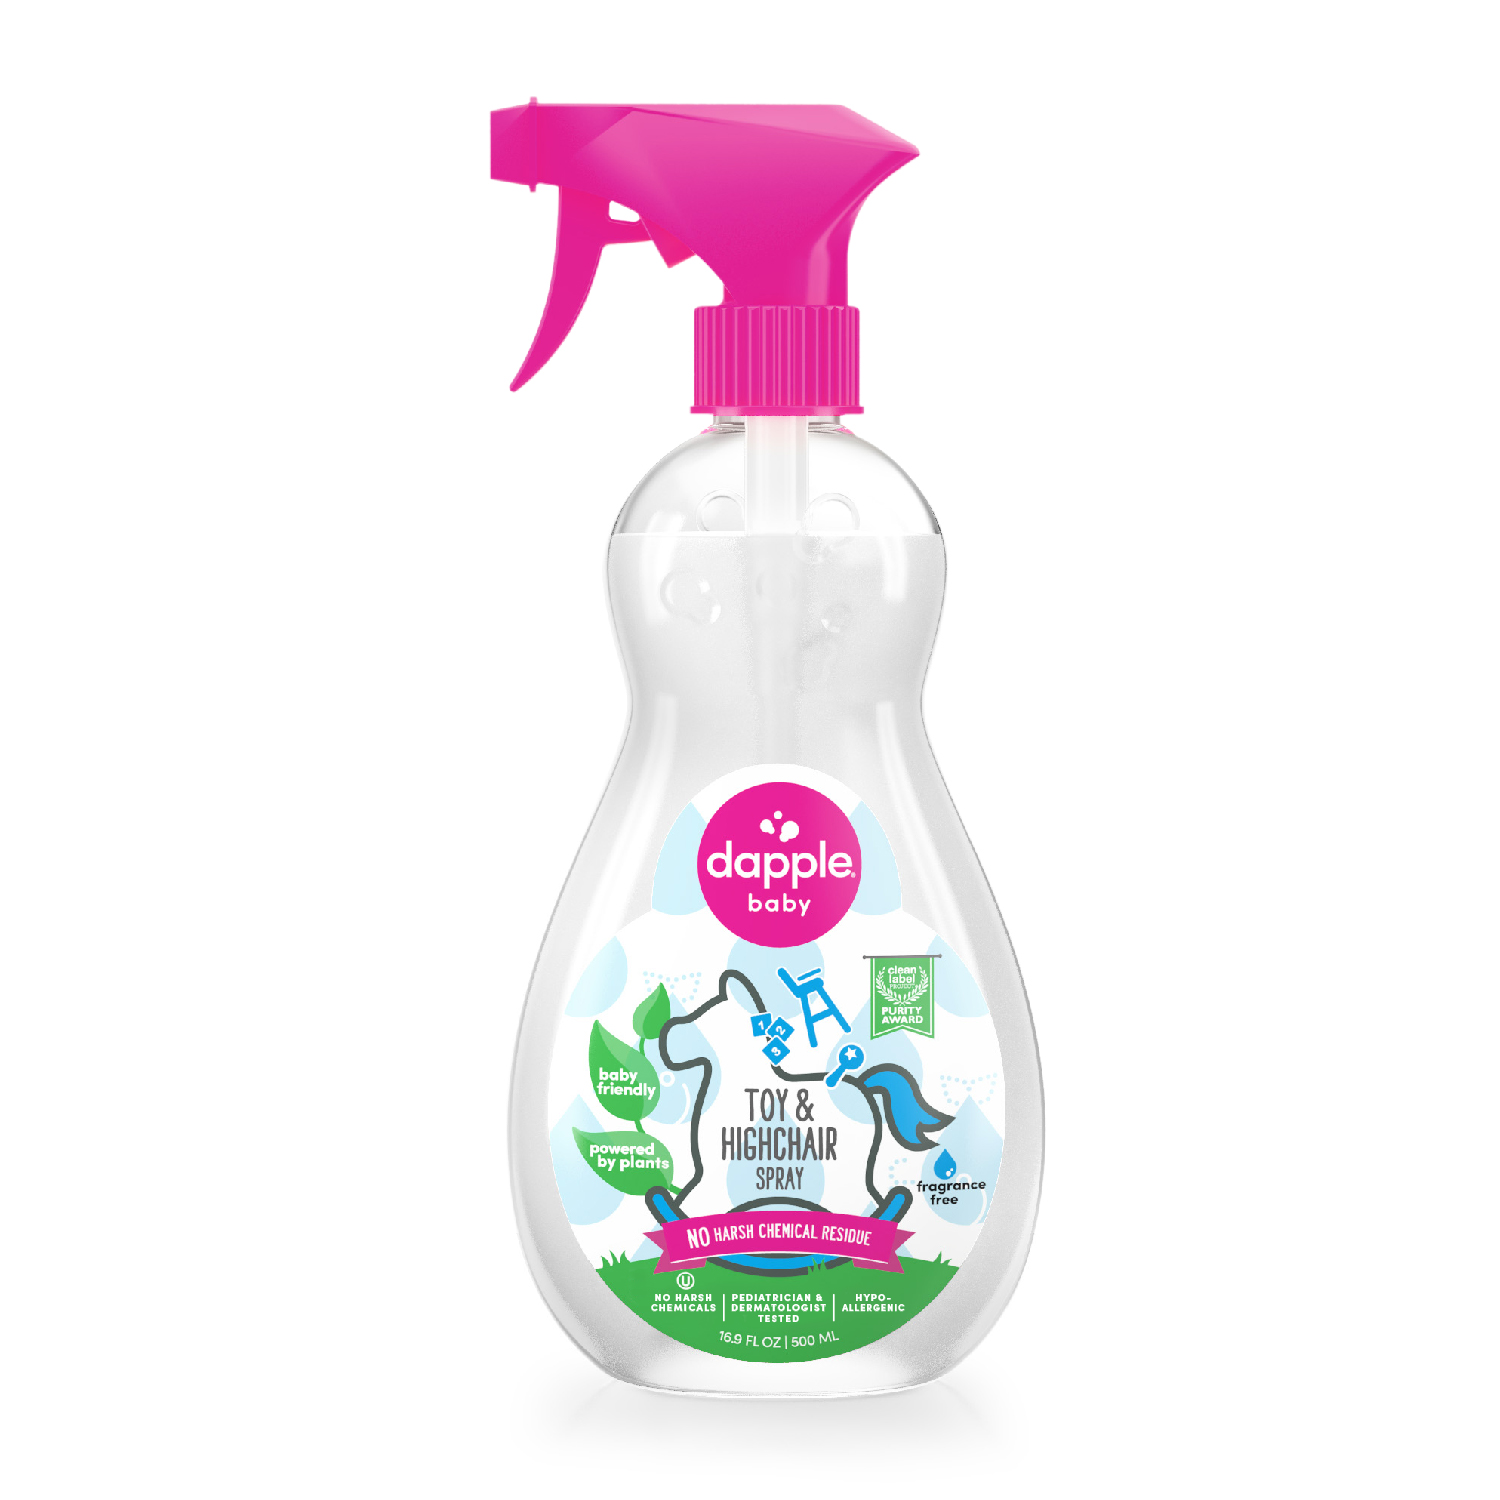 Toy High Chair Cleaning Spray